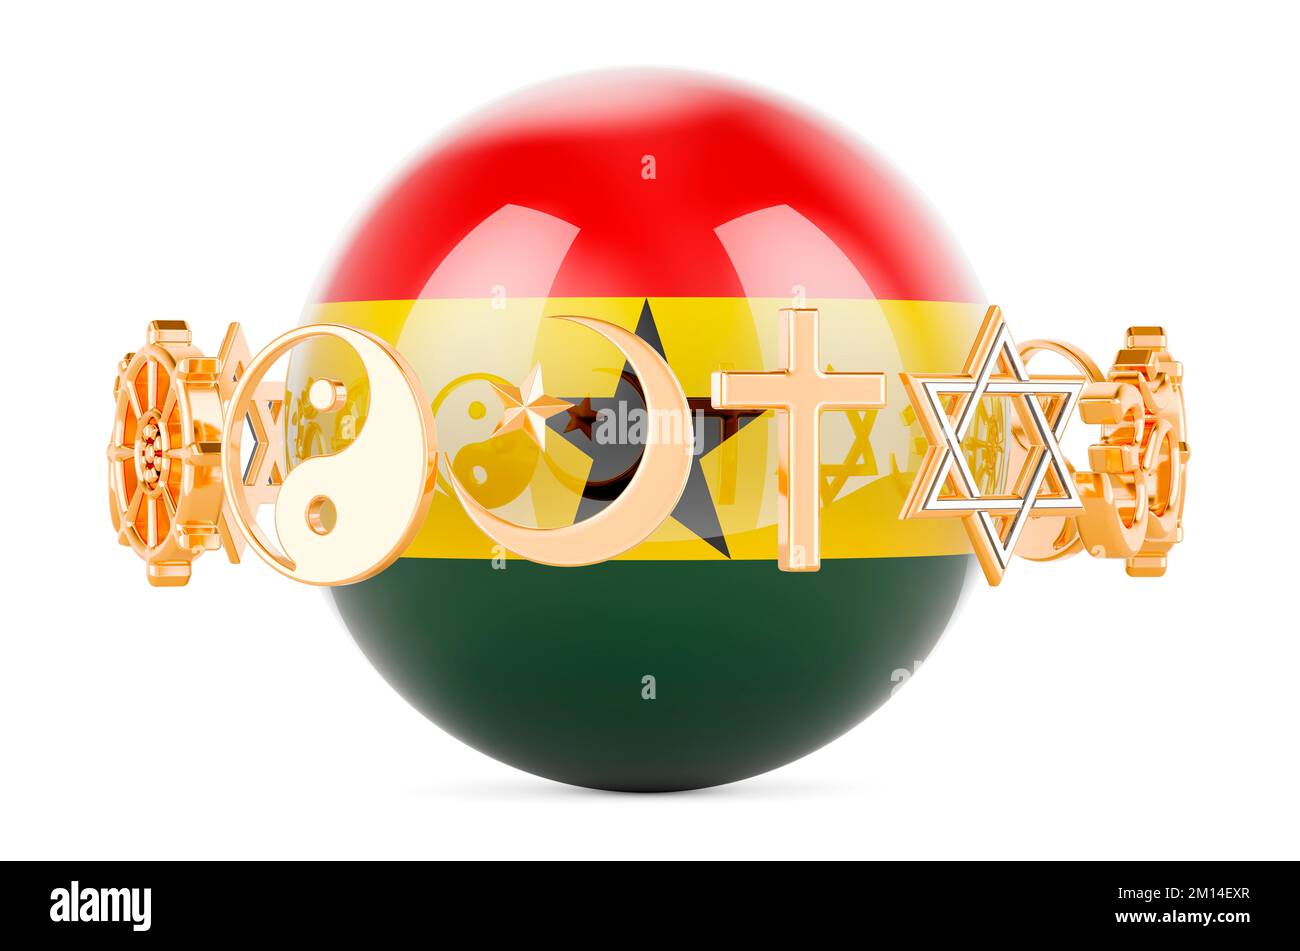 Ghanaian flag painted on sphere with religions symbols around, 3D rendering isolated on white background Stock Photo